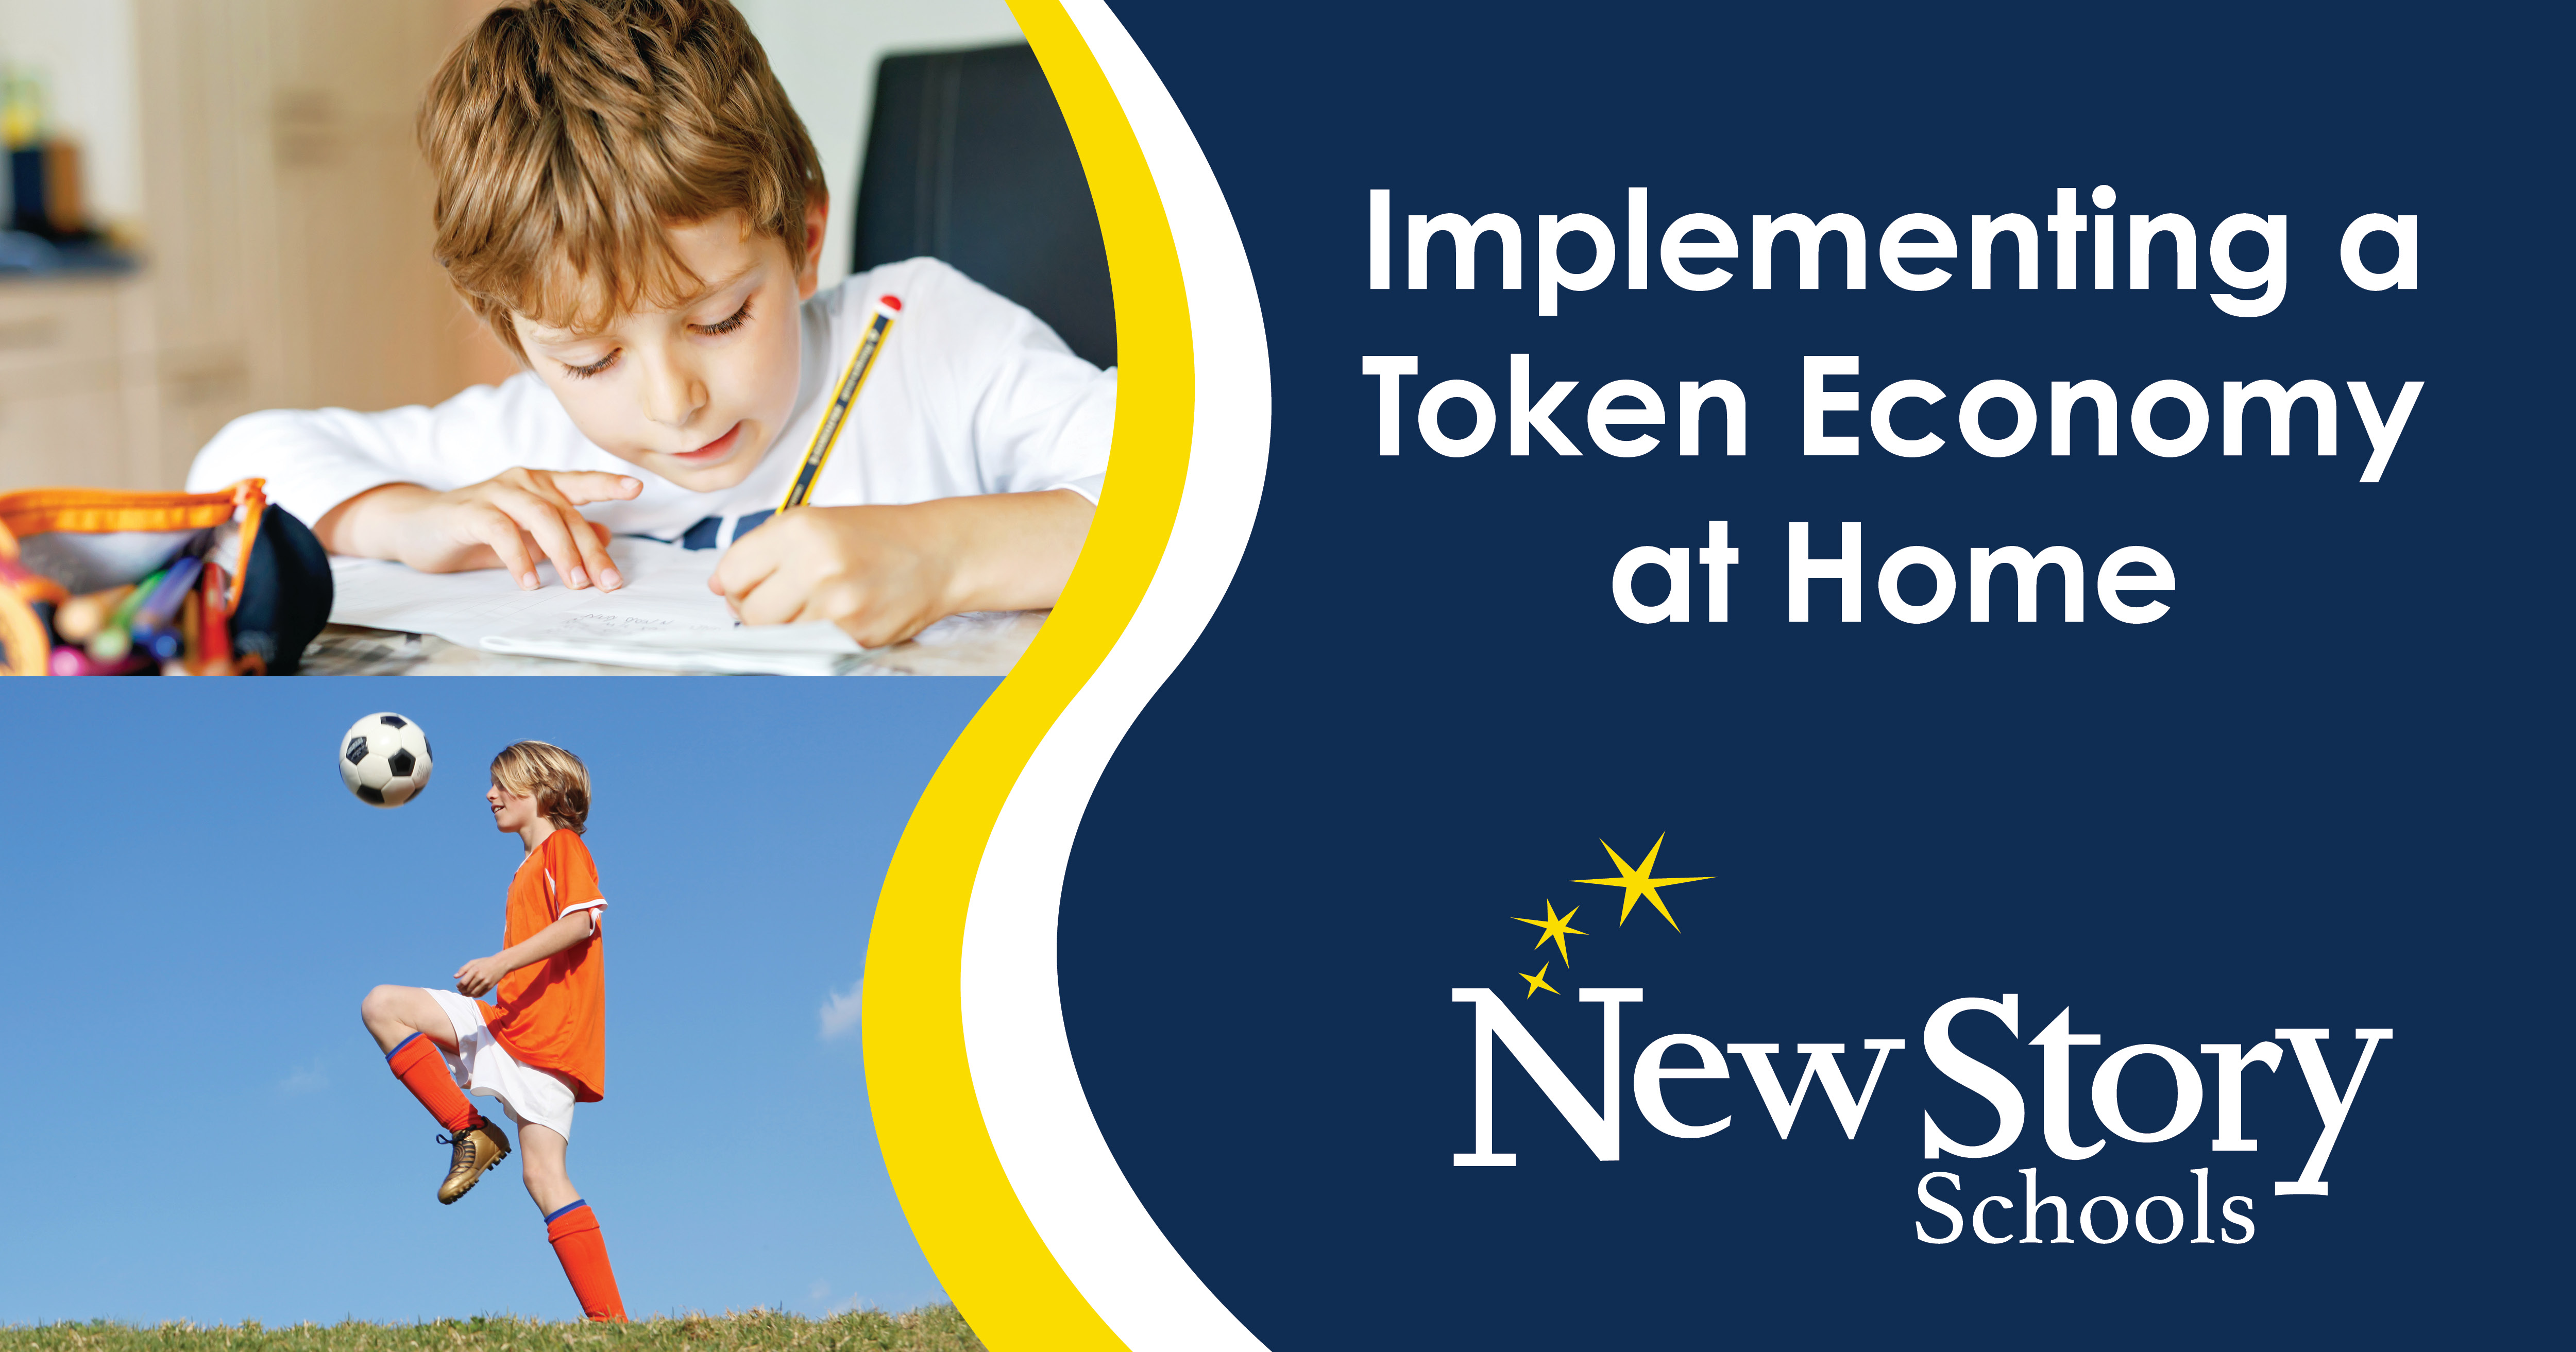 Implementing a Token Economy at Home